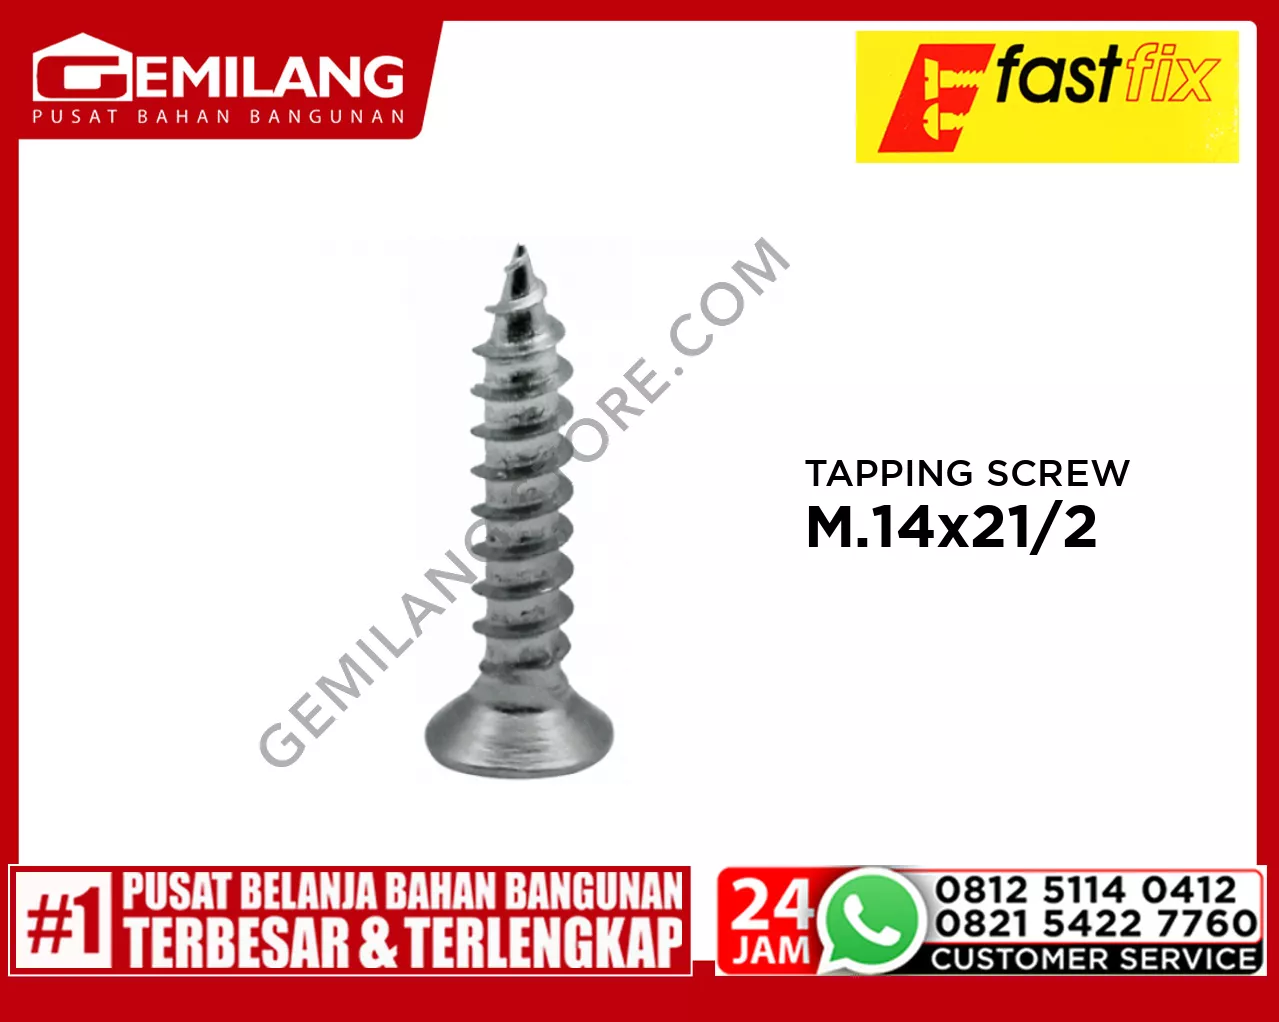 CSK TAPPING SCREW M.14 x 21/2 8pc